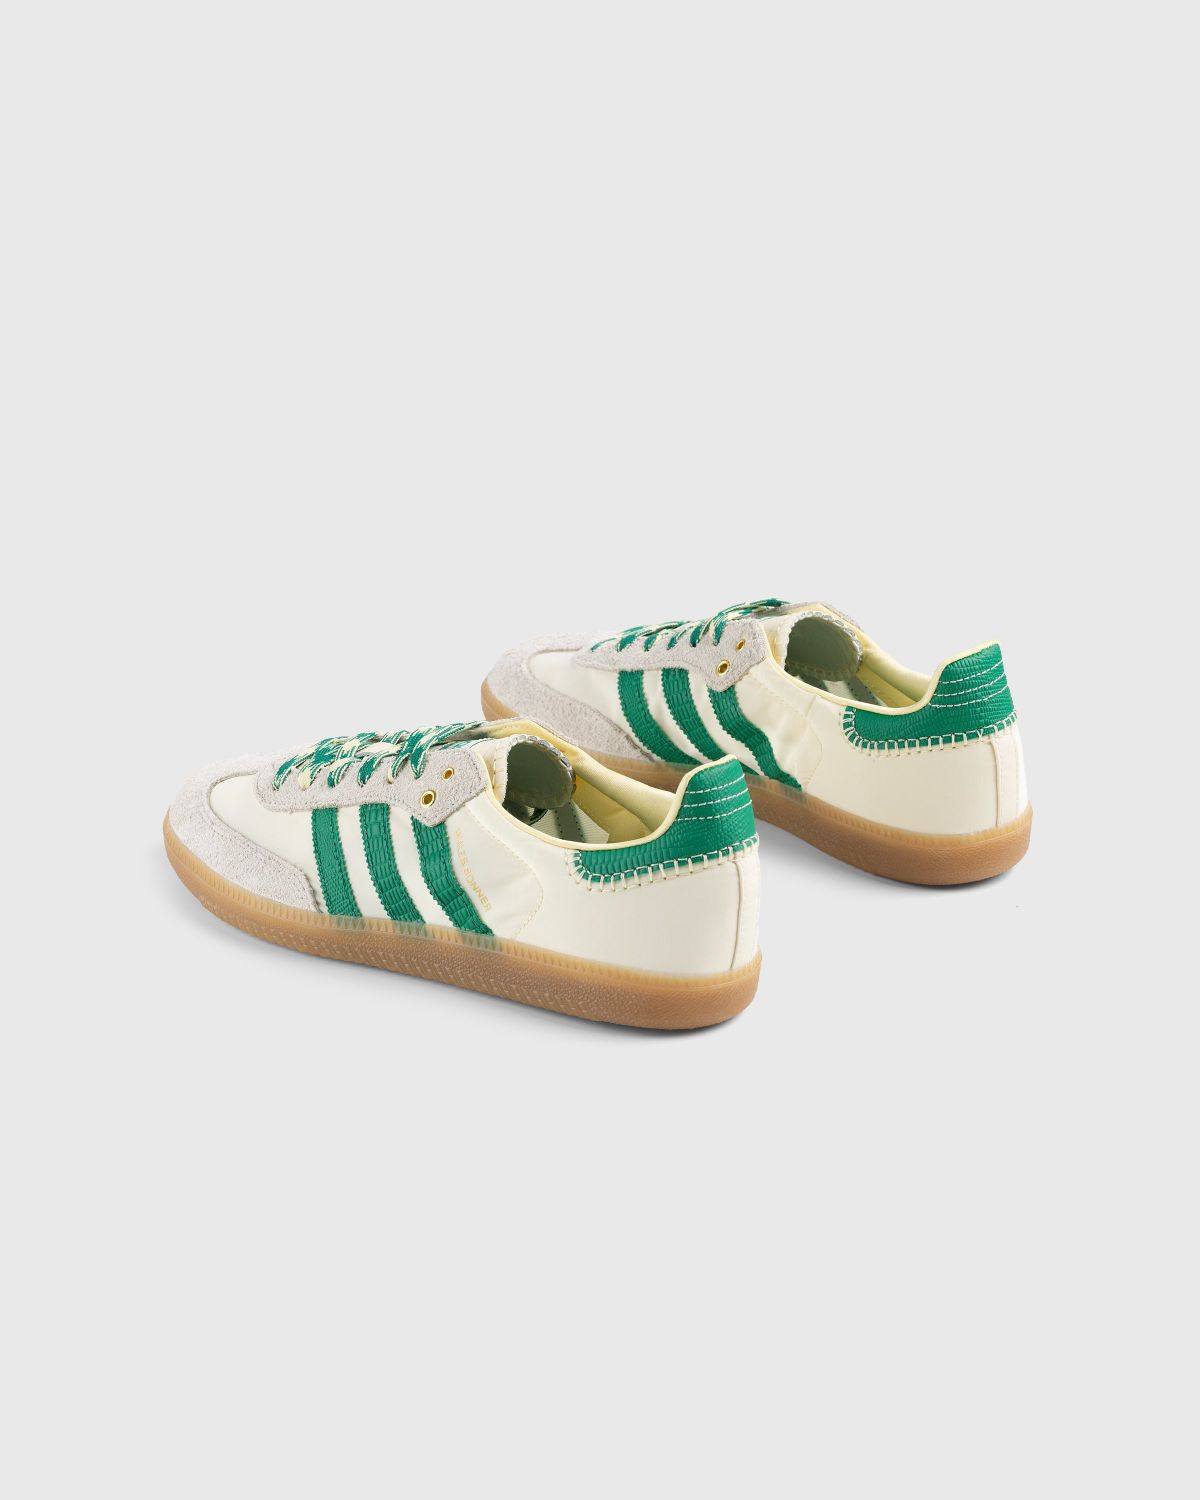 Adidas x Wales Bonner – WB Samba Cream White/Bold Green/Easy Yellow - Low Top Sneakers - Beige - Image 4